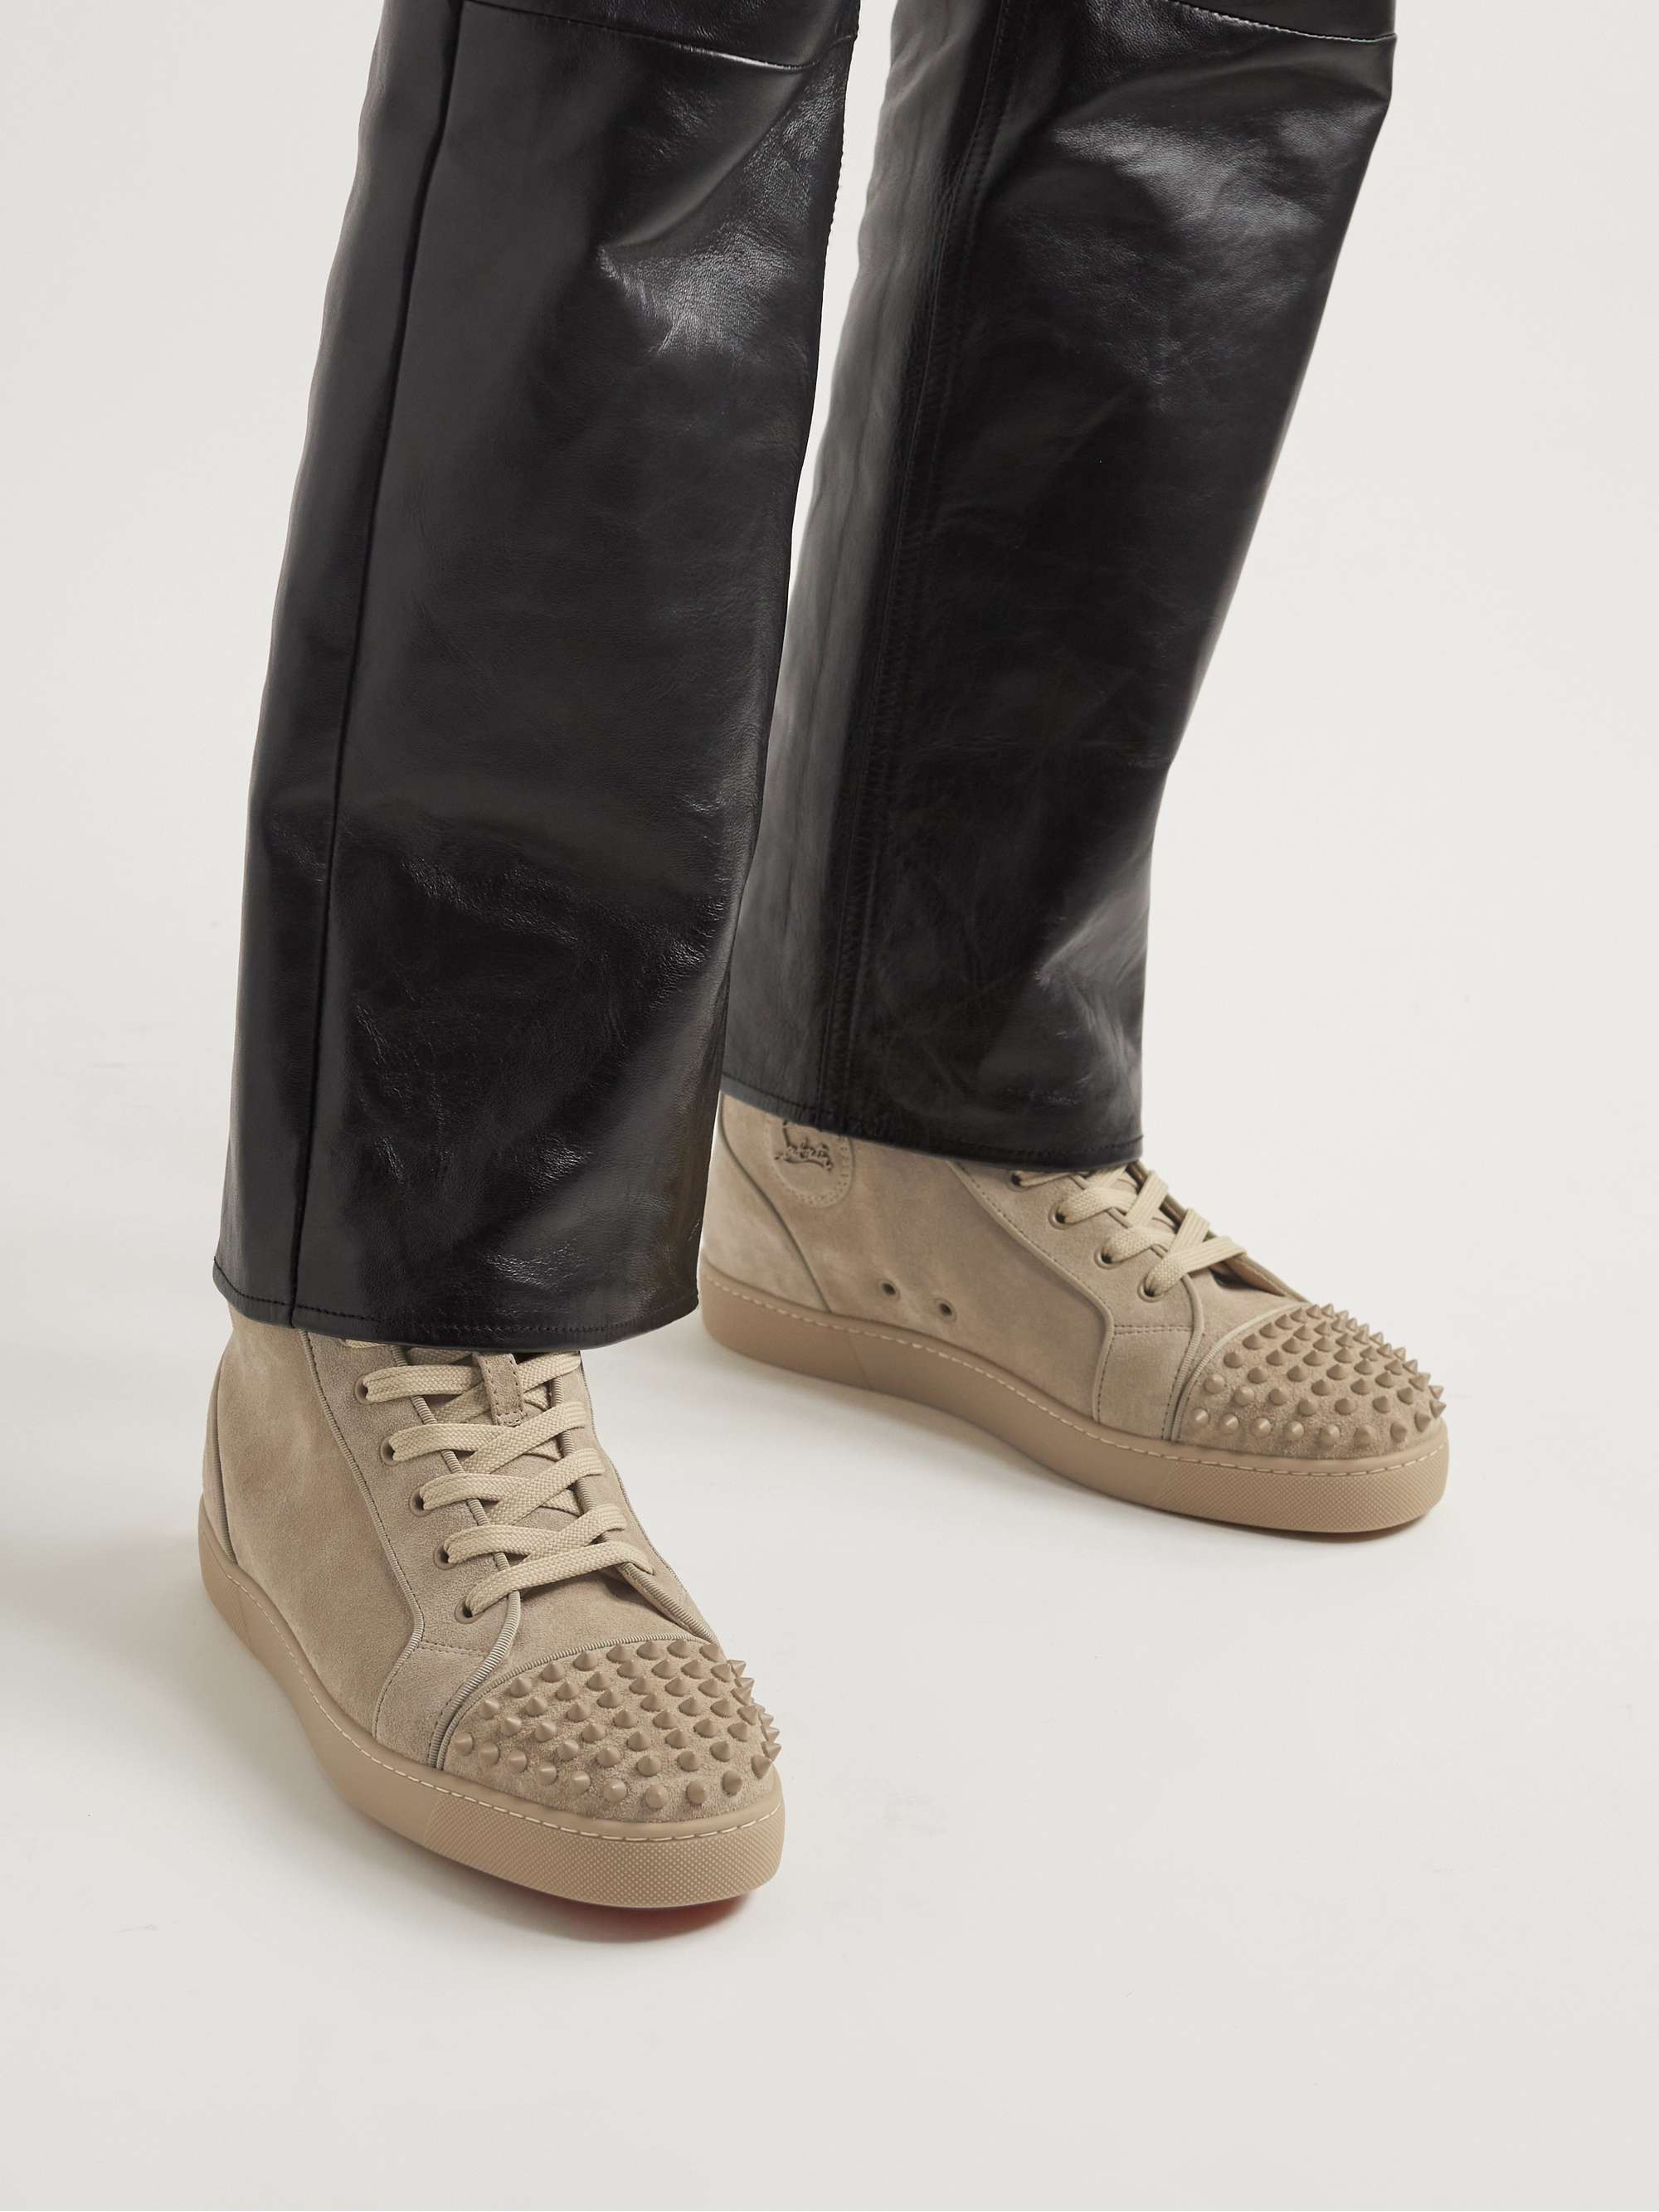 CHRISTIAN LOUBOUTIN Louis Spiked Suede High-Top Sneakers for Men | MR PORTER